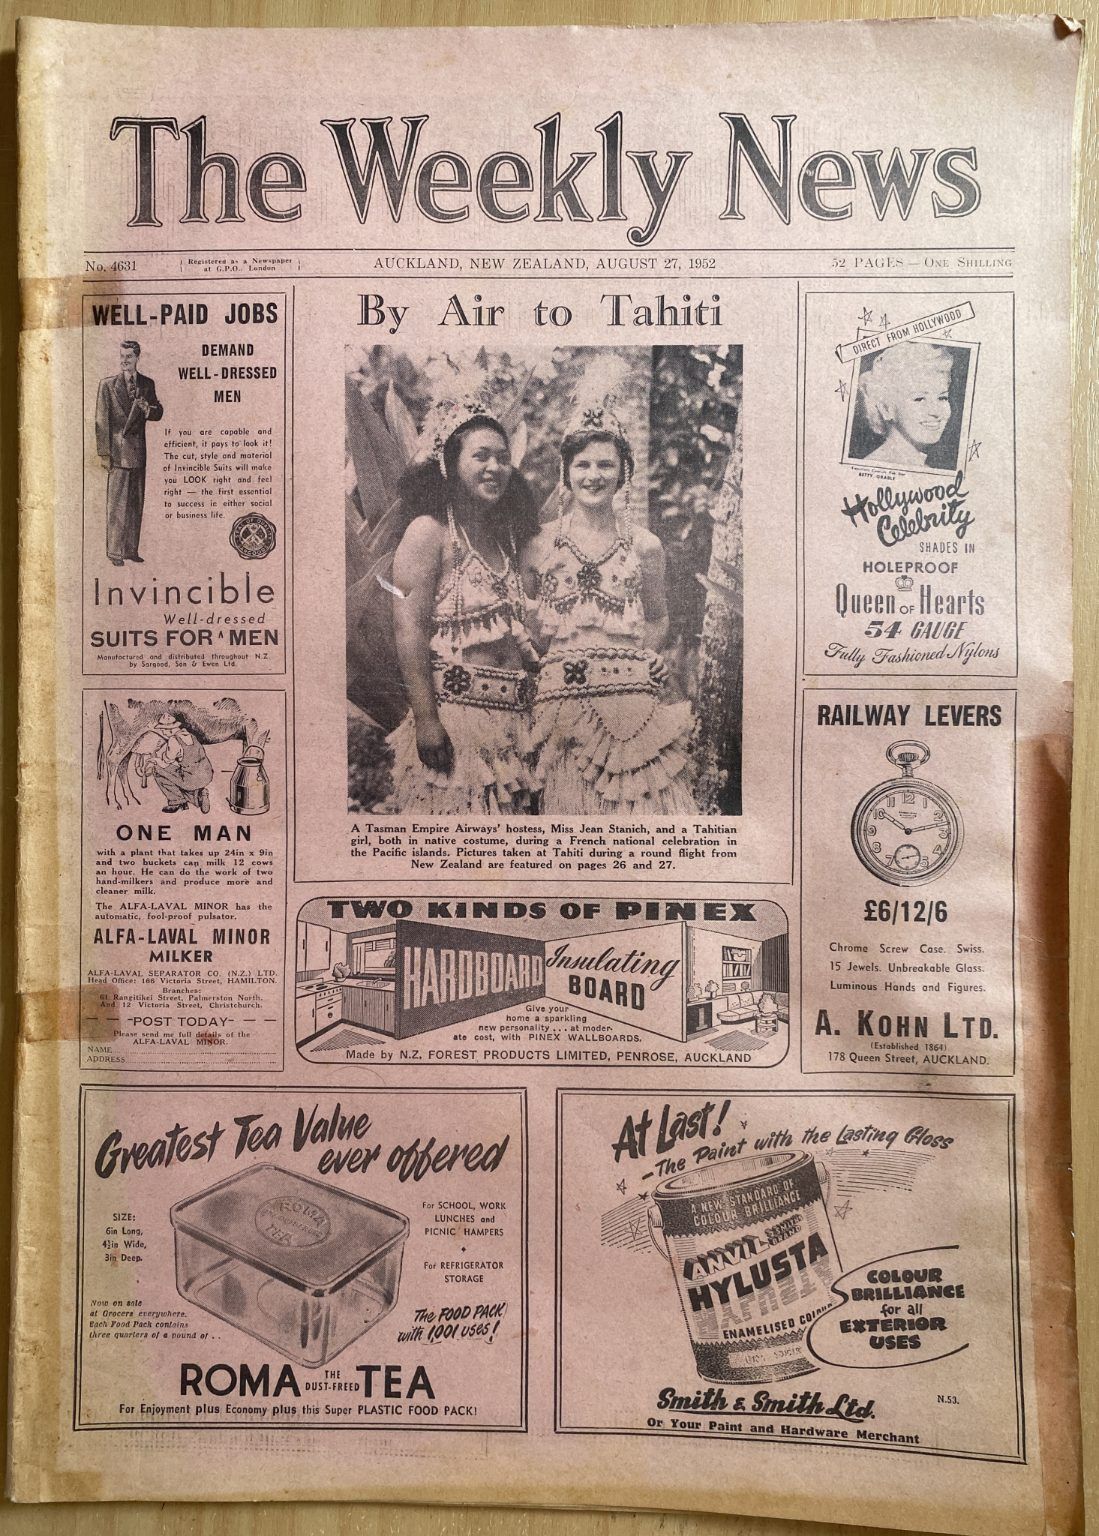 OLD NEWSPAPER: The Weekly News - No. 4631, 27 August 1952